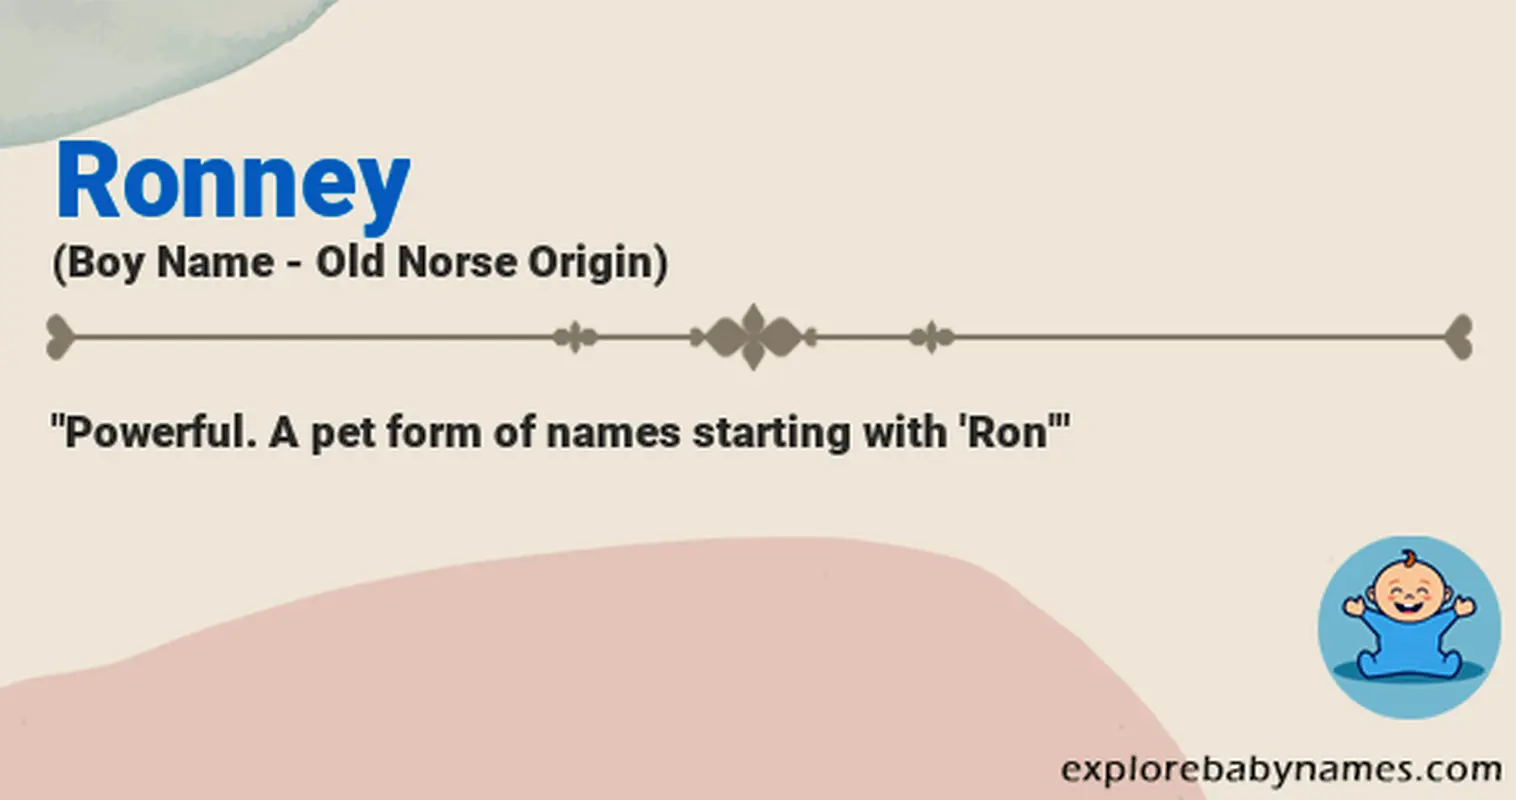 Meaning of Ronney